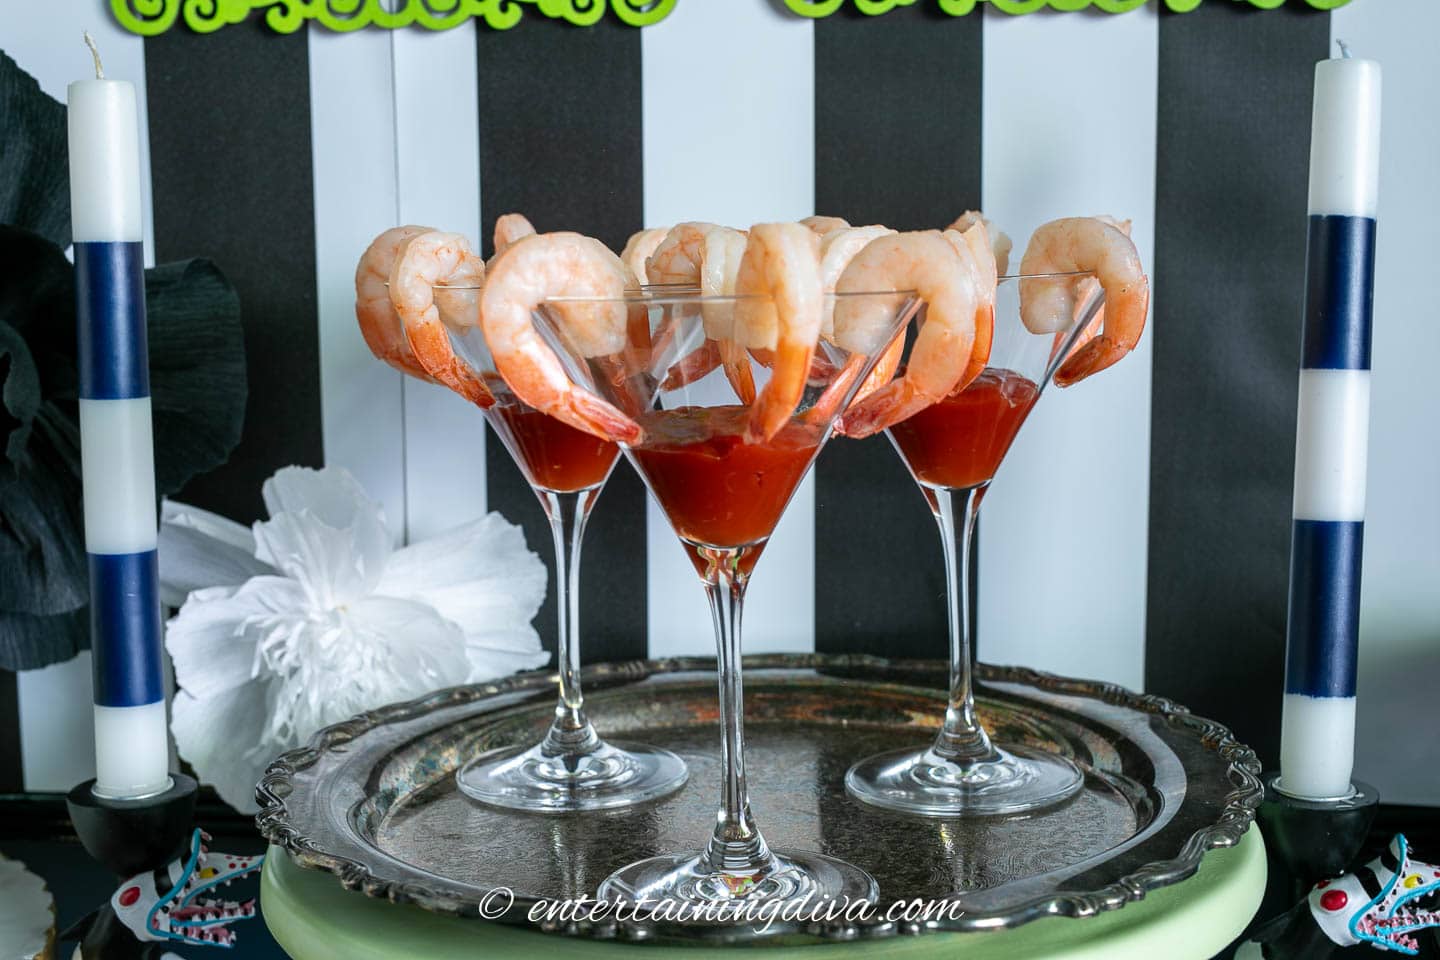 Shrimp cocktail on a tray at a Beetlejuice party